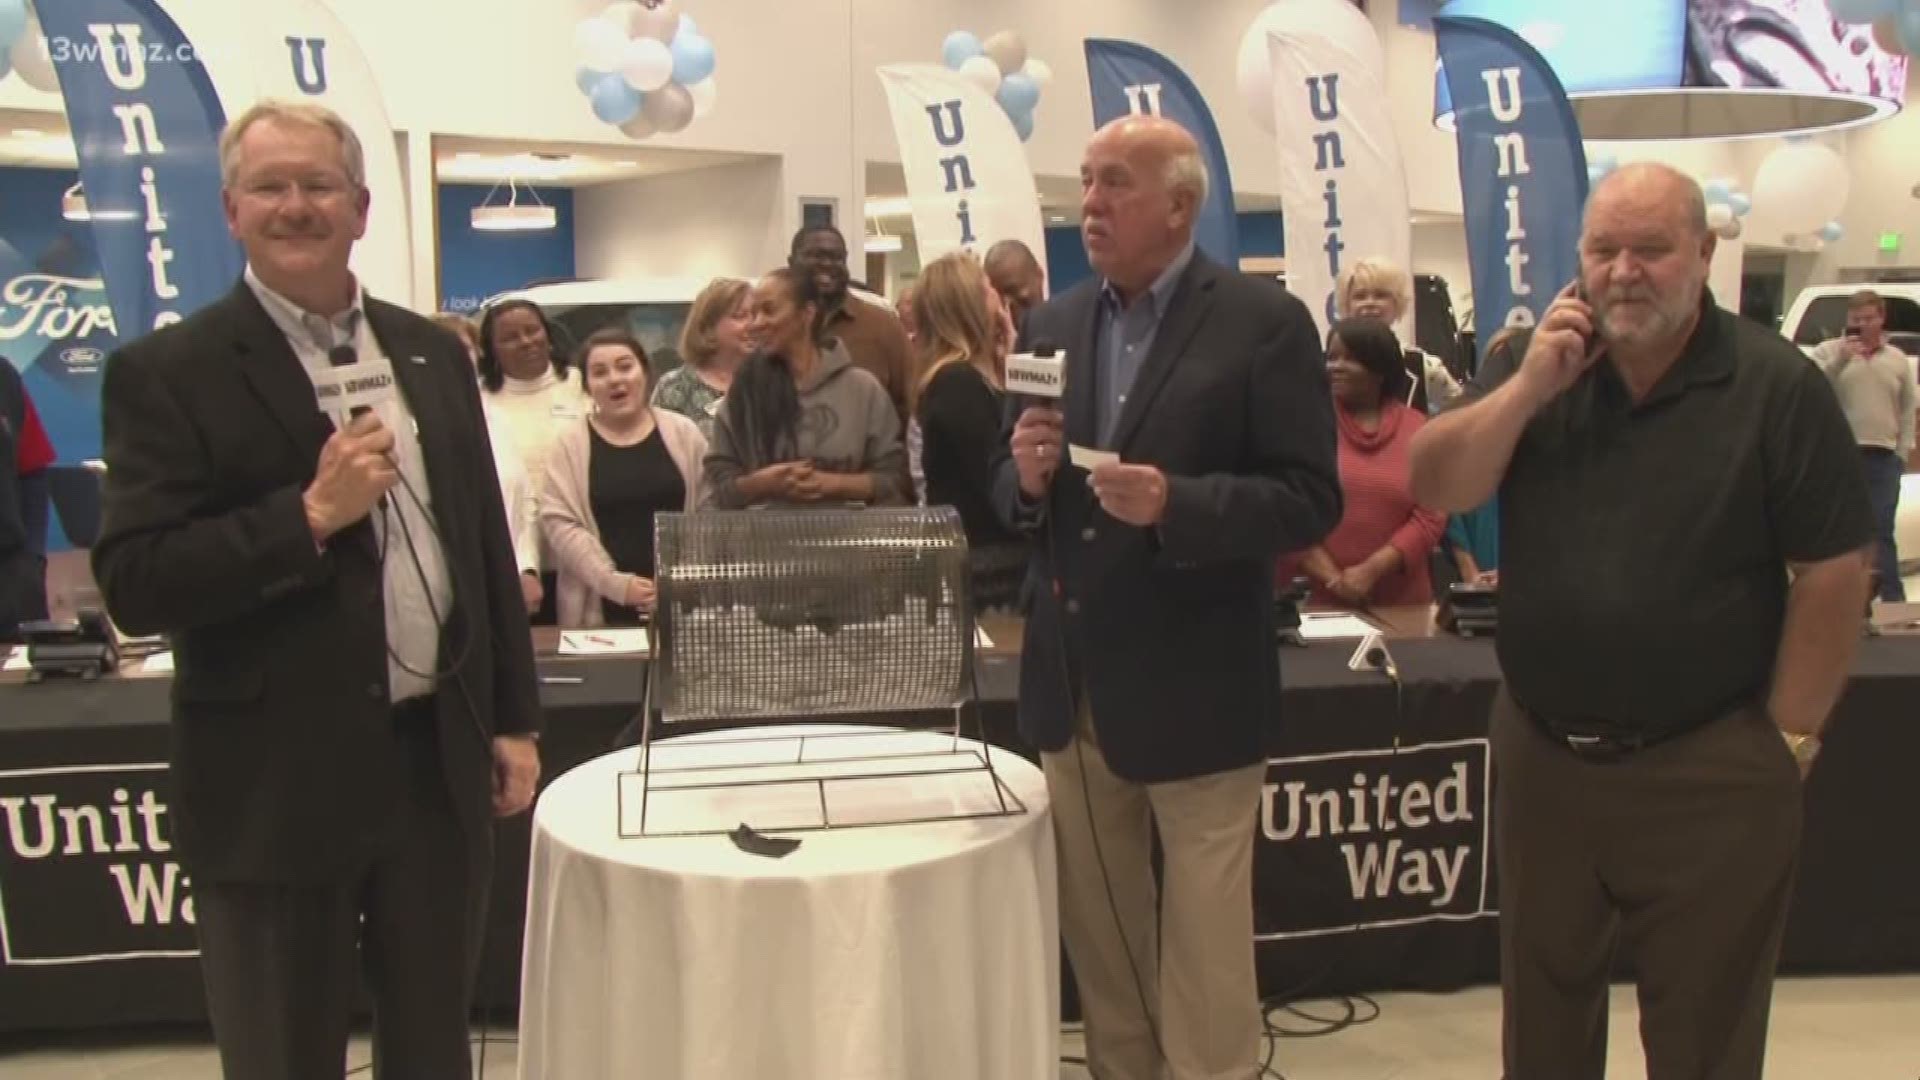 Proceeds from the raffle help United Way of Central Georgia with its programs